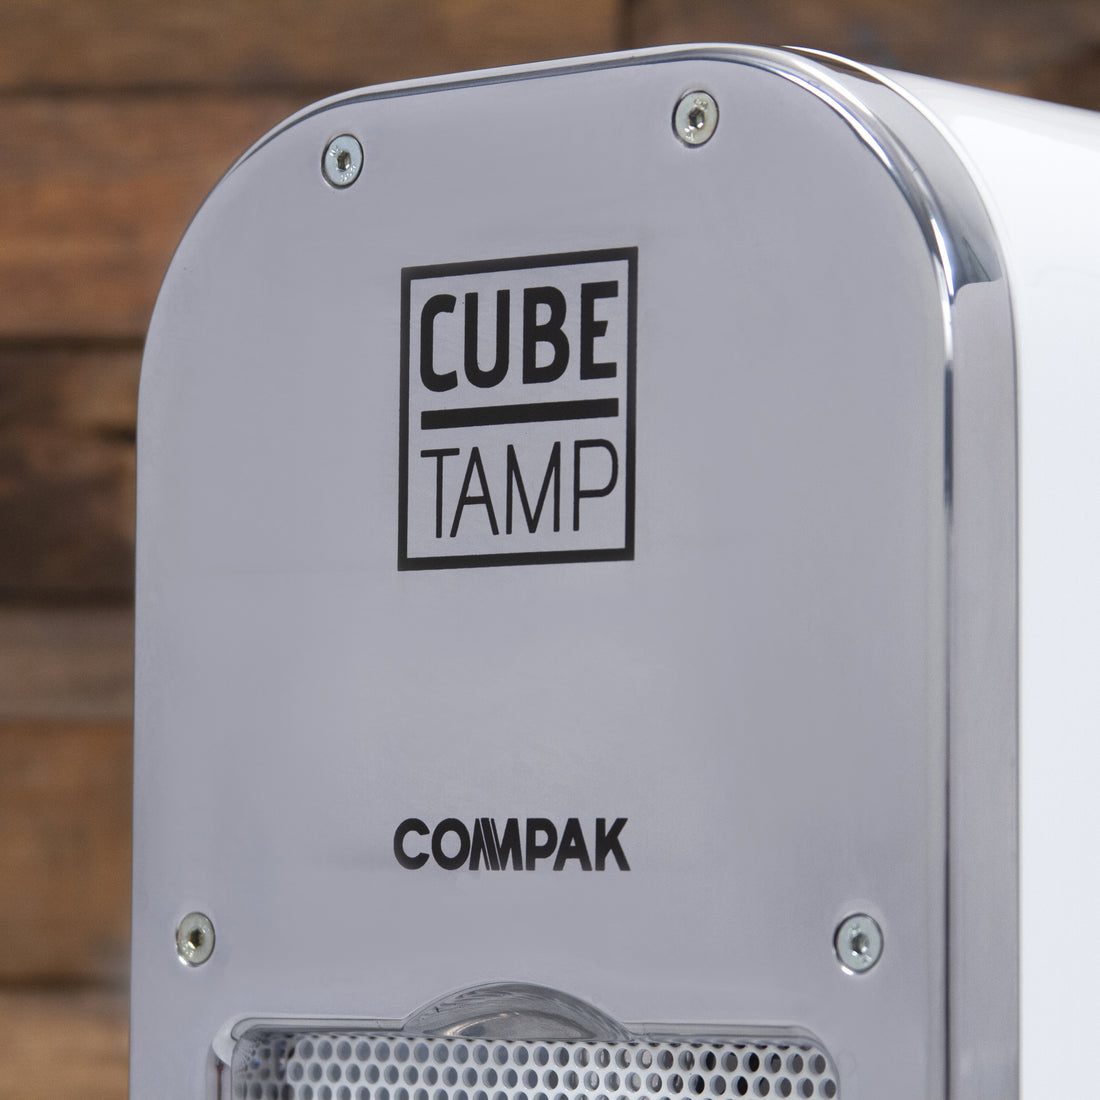 Compak Cube Tamper from the rear with Cube logo.